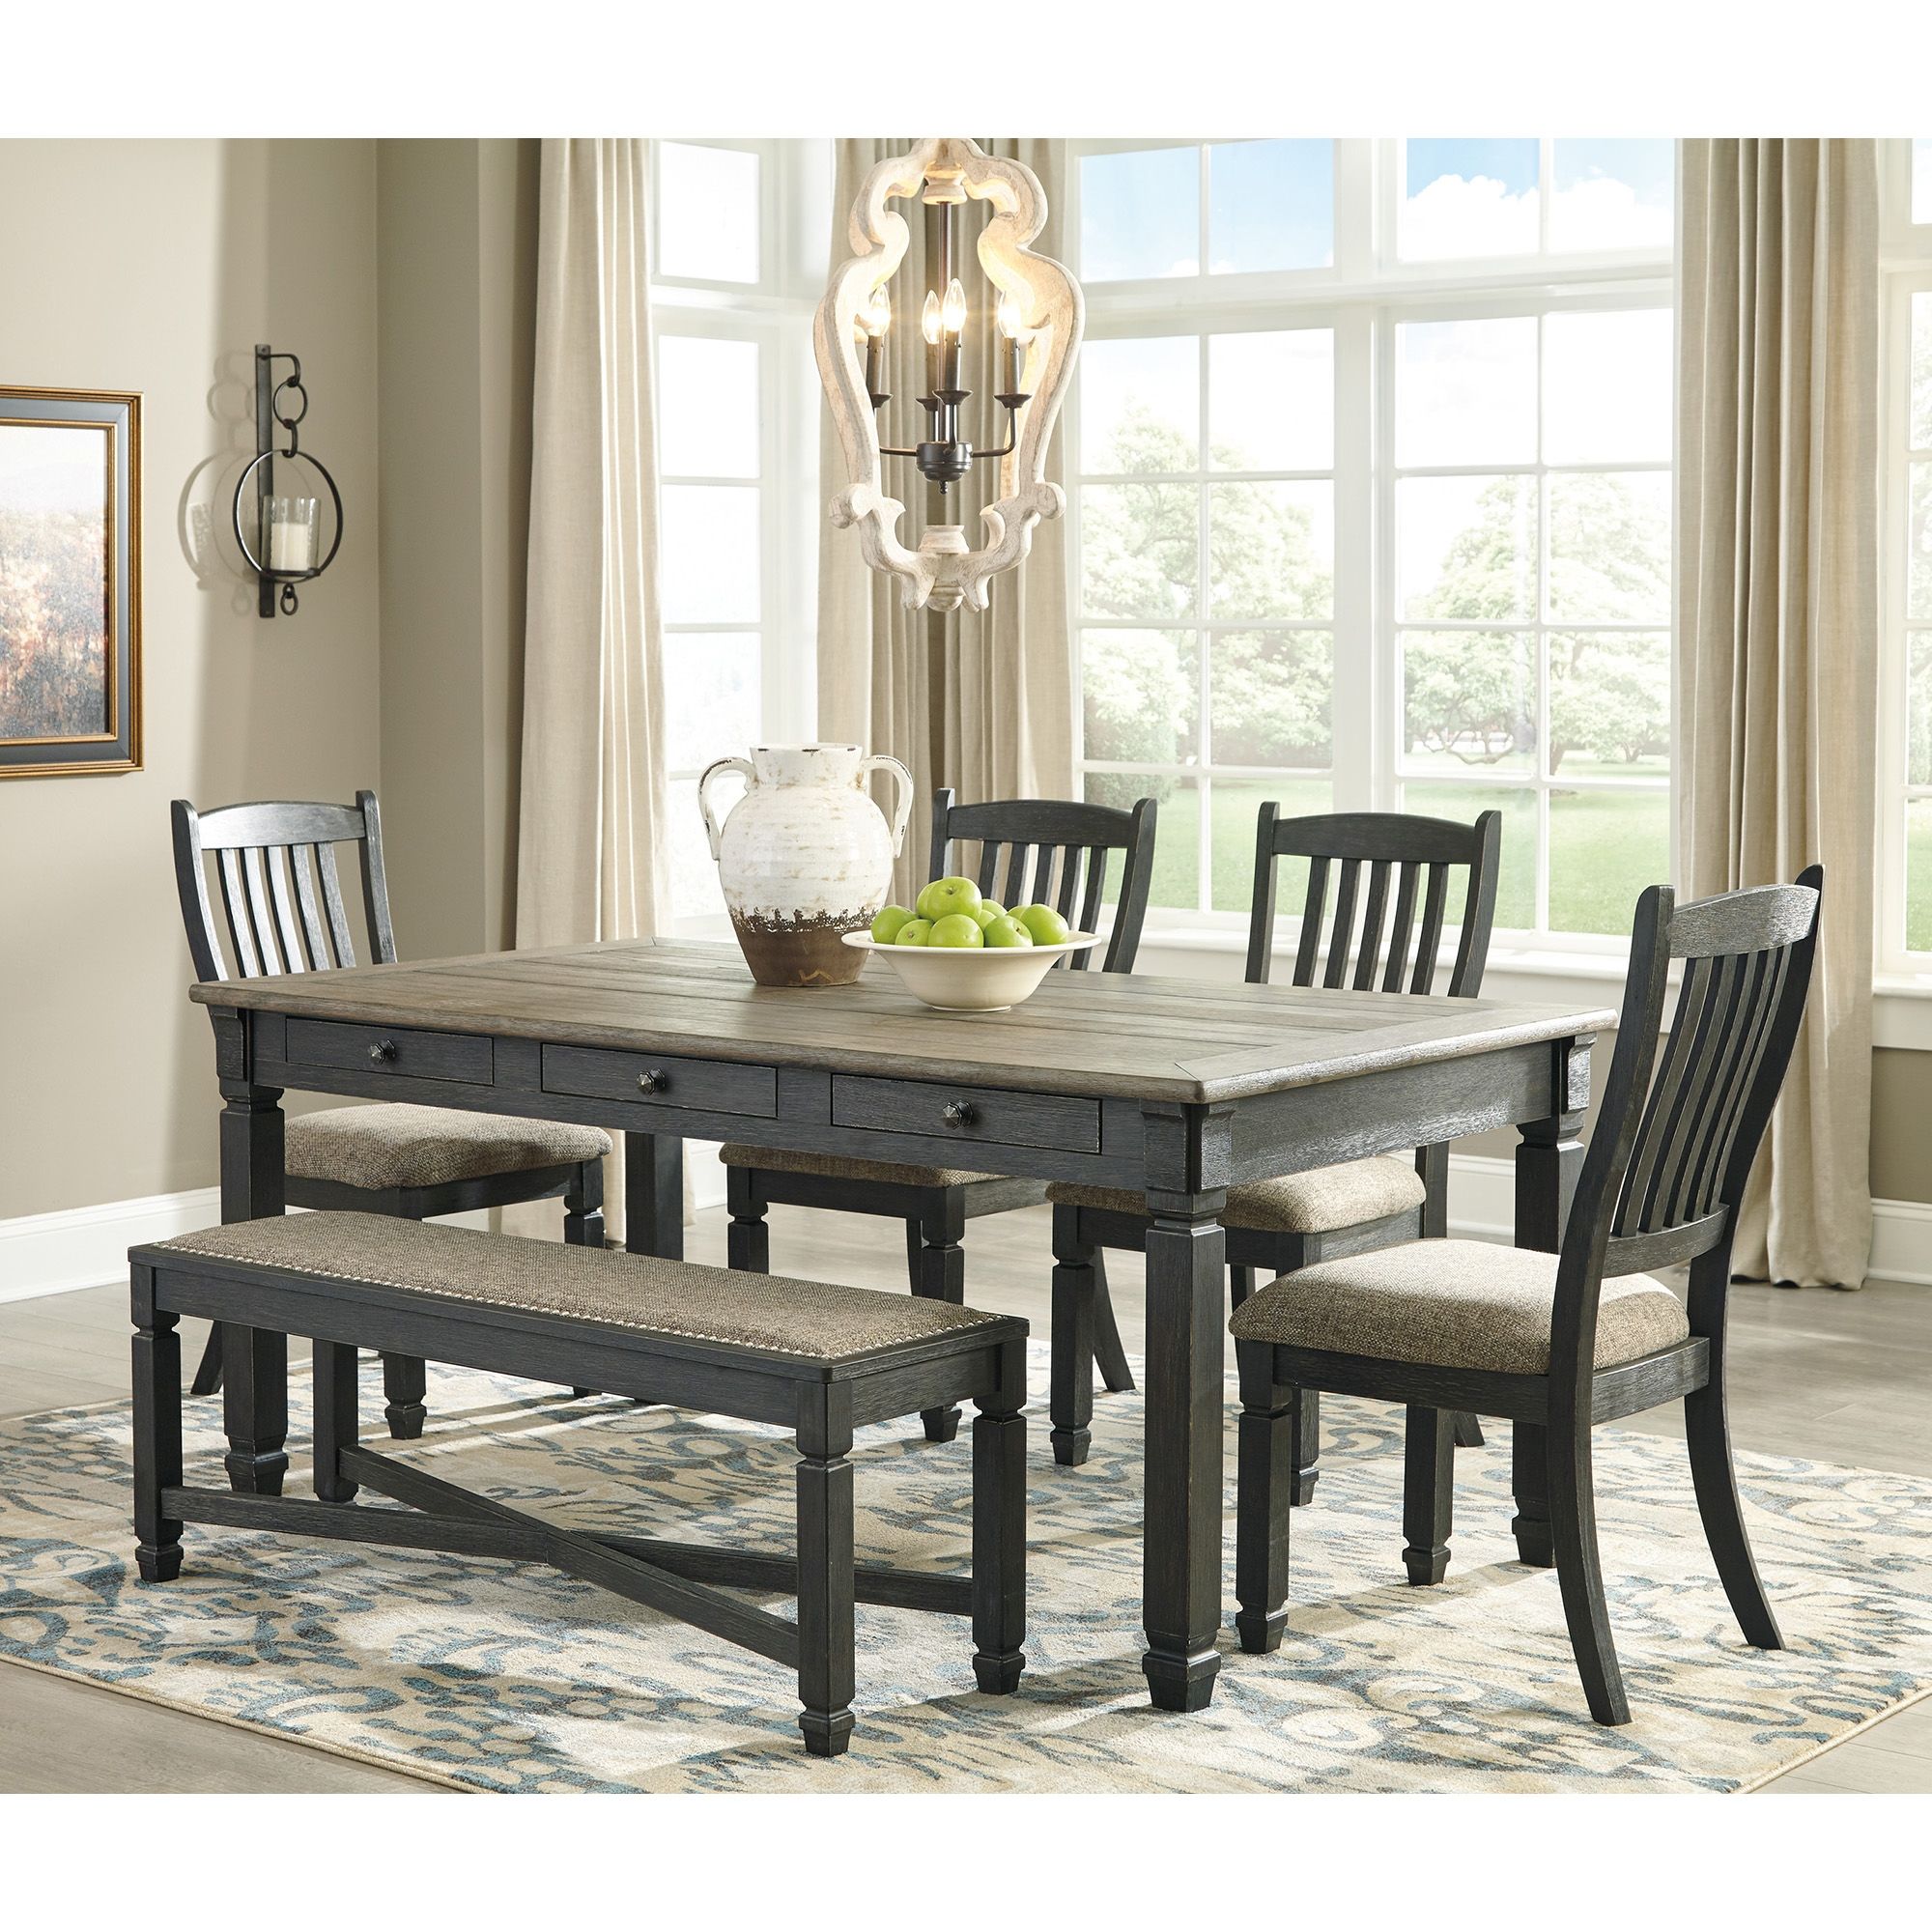 tyler creek 6 piece dining set (rectangular table with 4 side